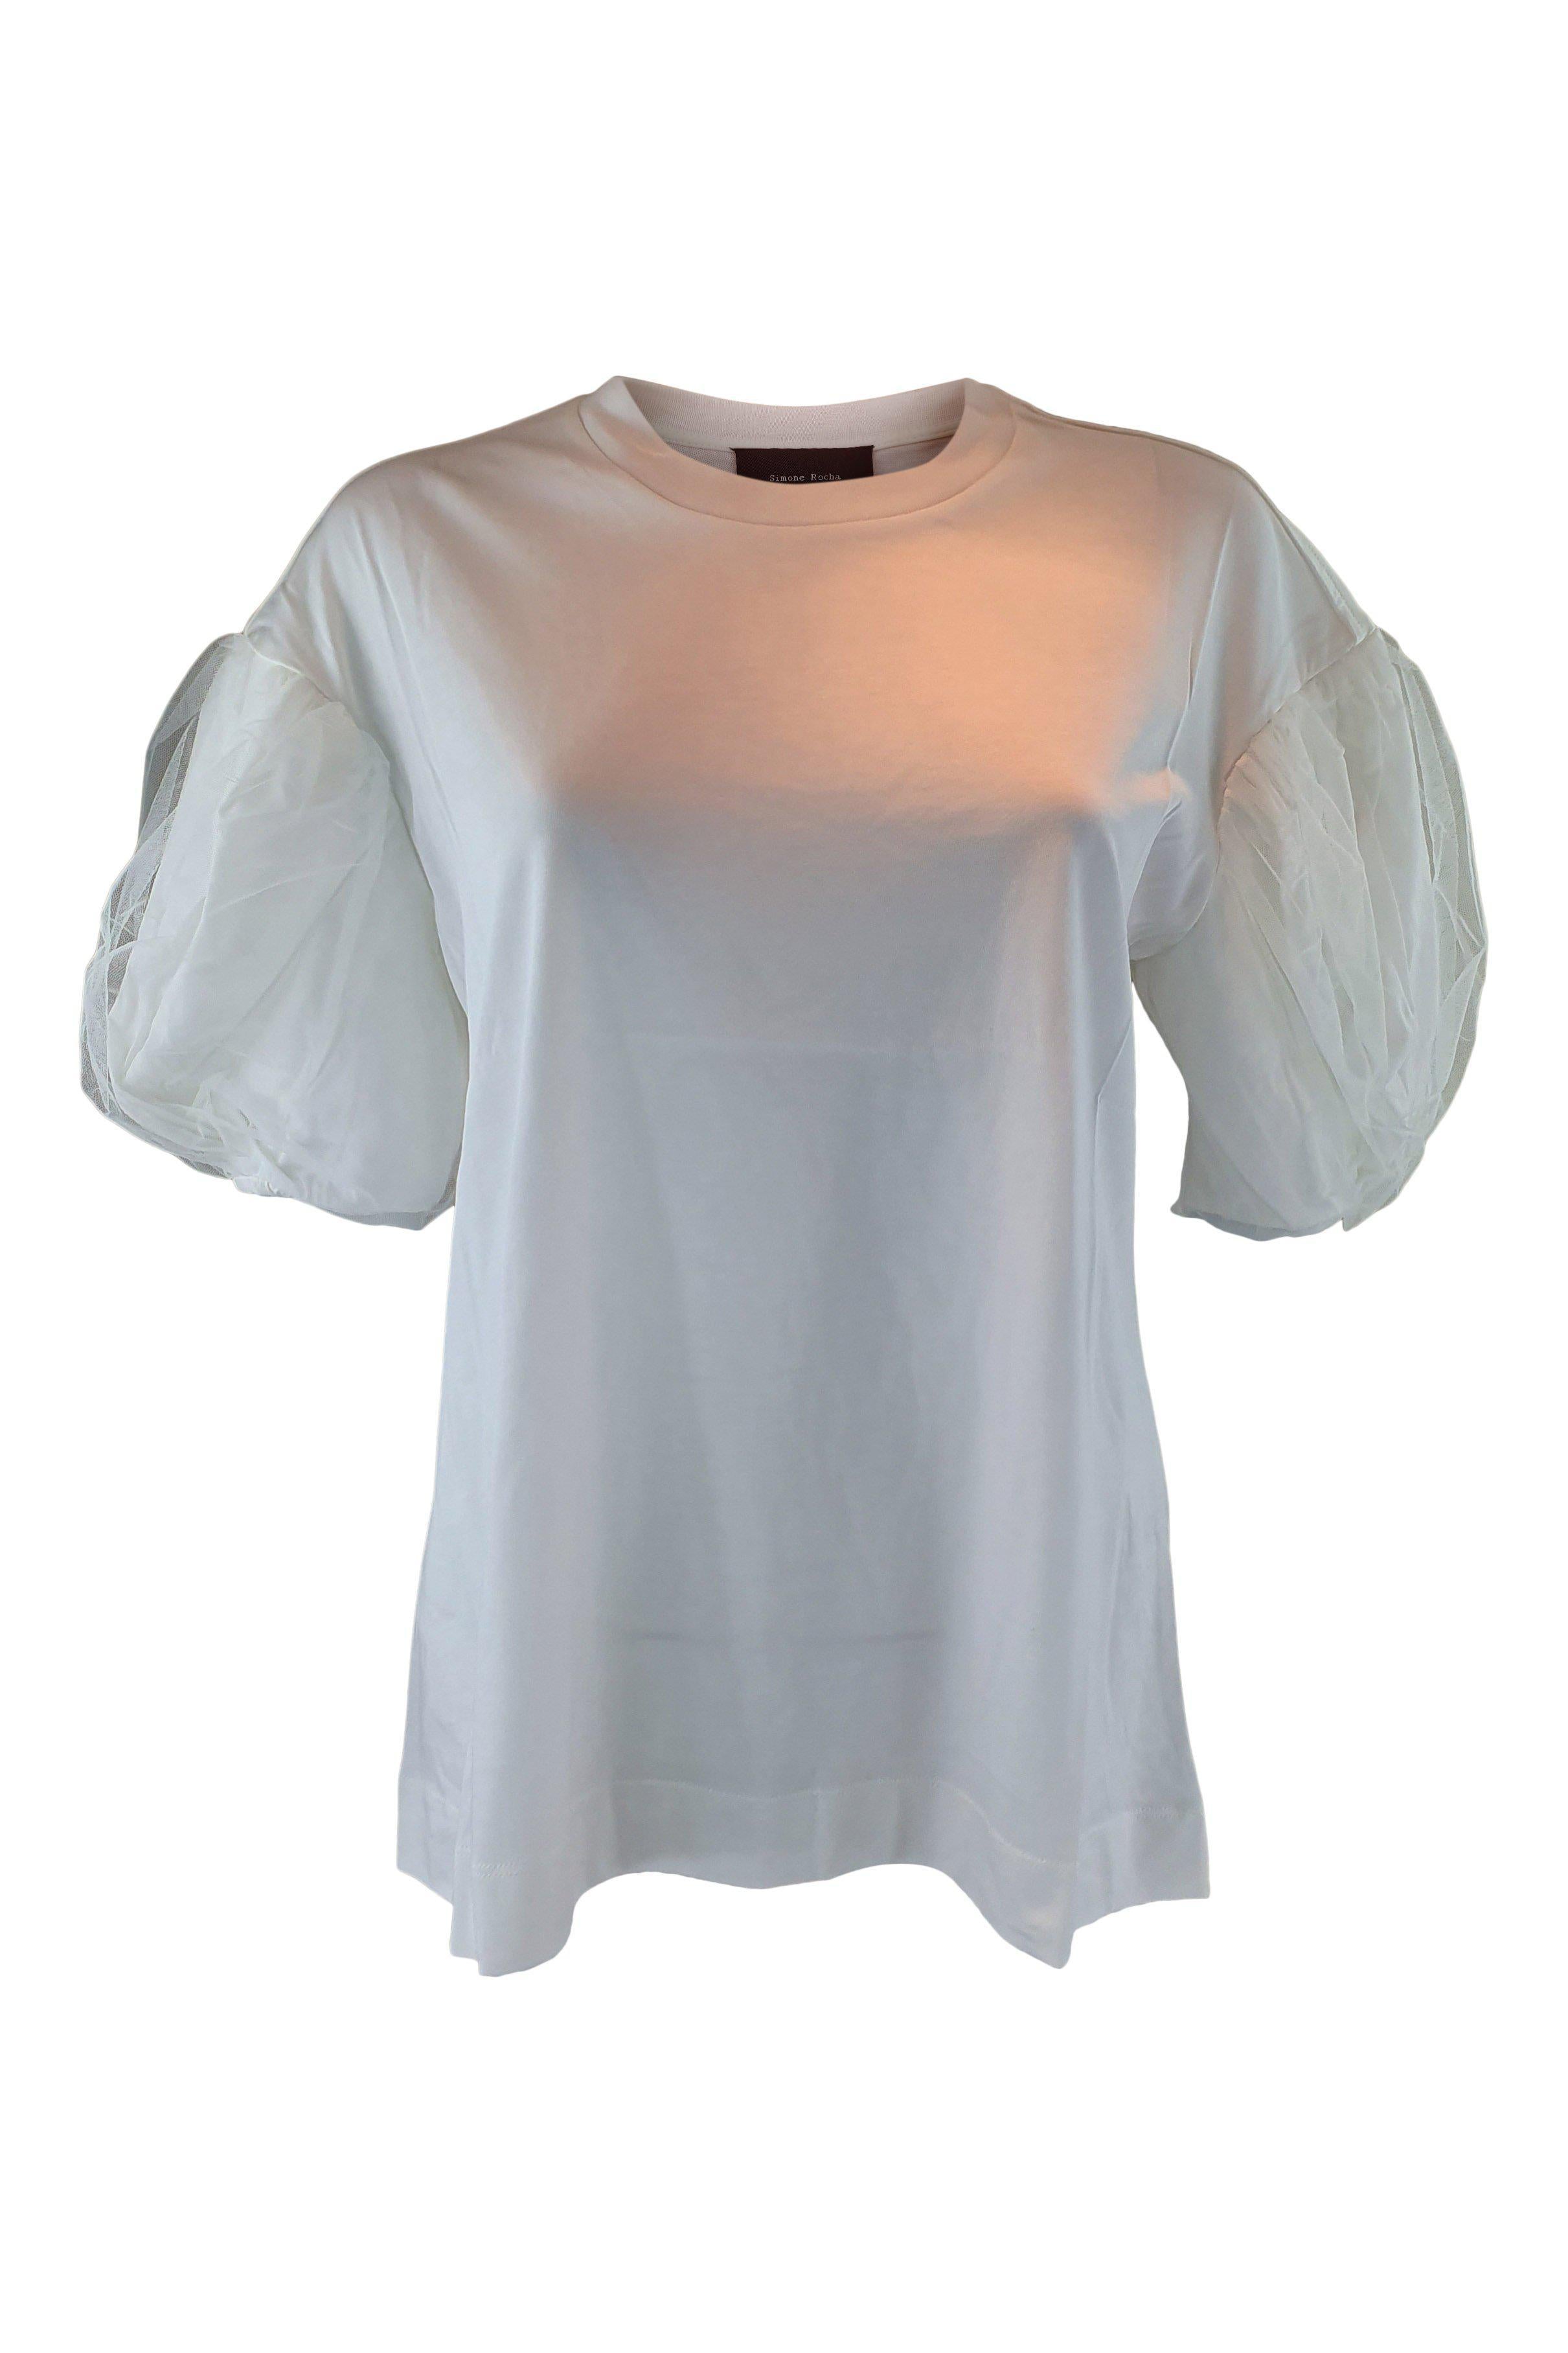 SIMONE ROCHA White Cotton Jersey T-Shirt With Tulle Layer Puff Sleeves (M)-Simone Rocha-The Freperie